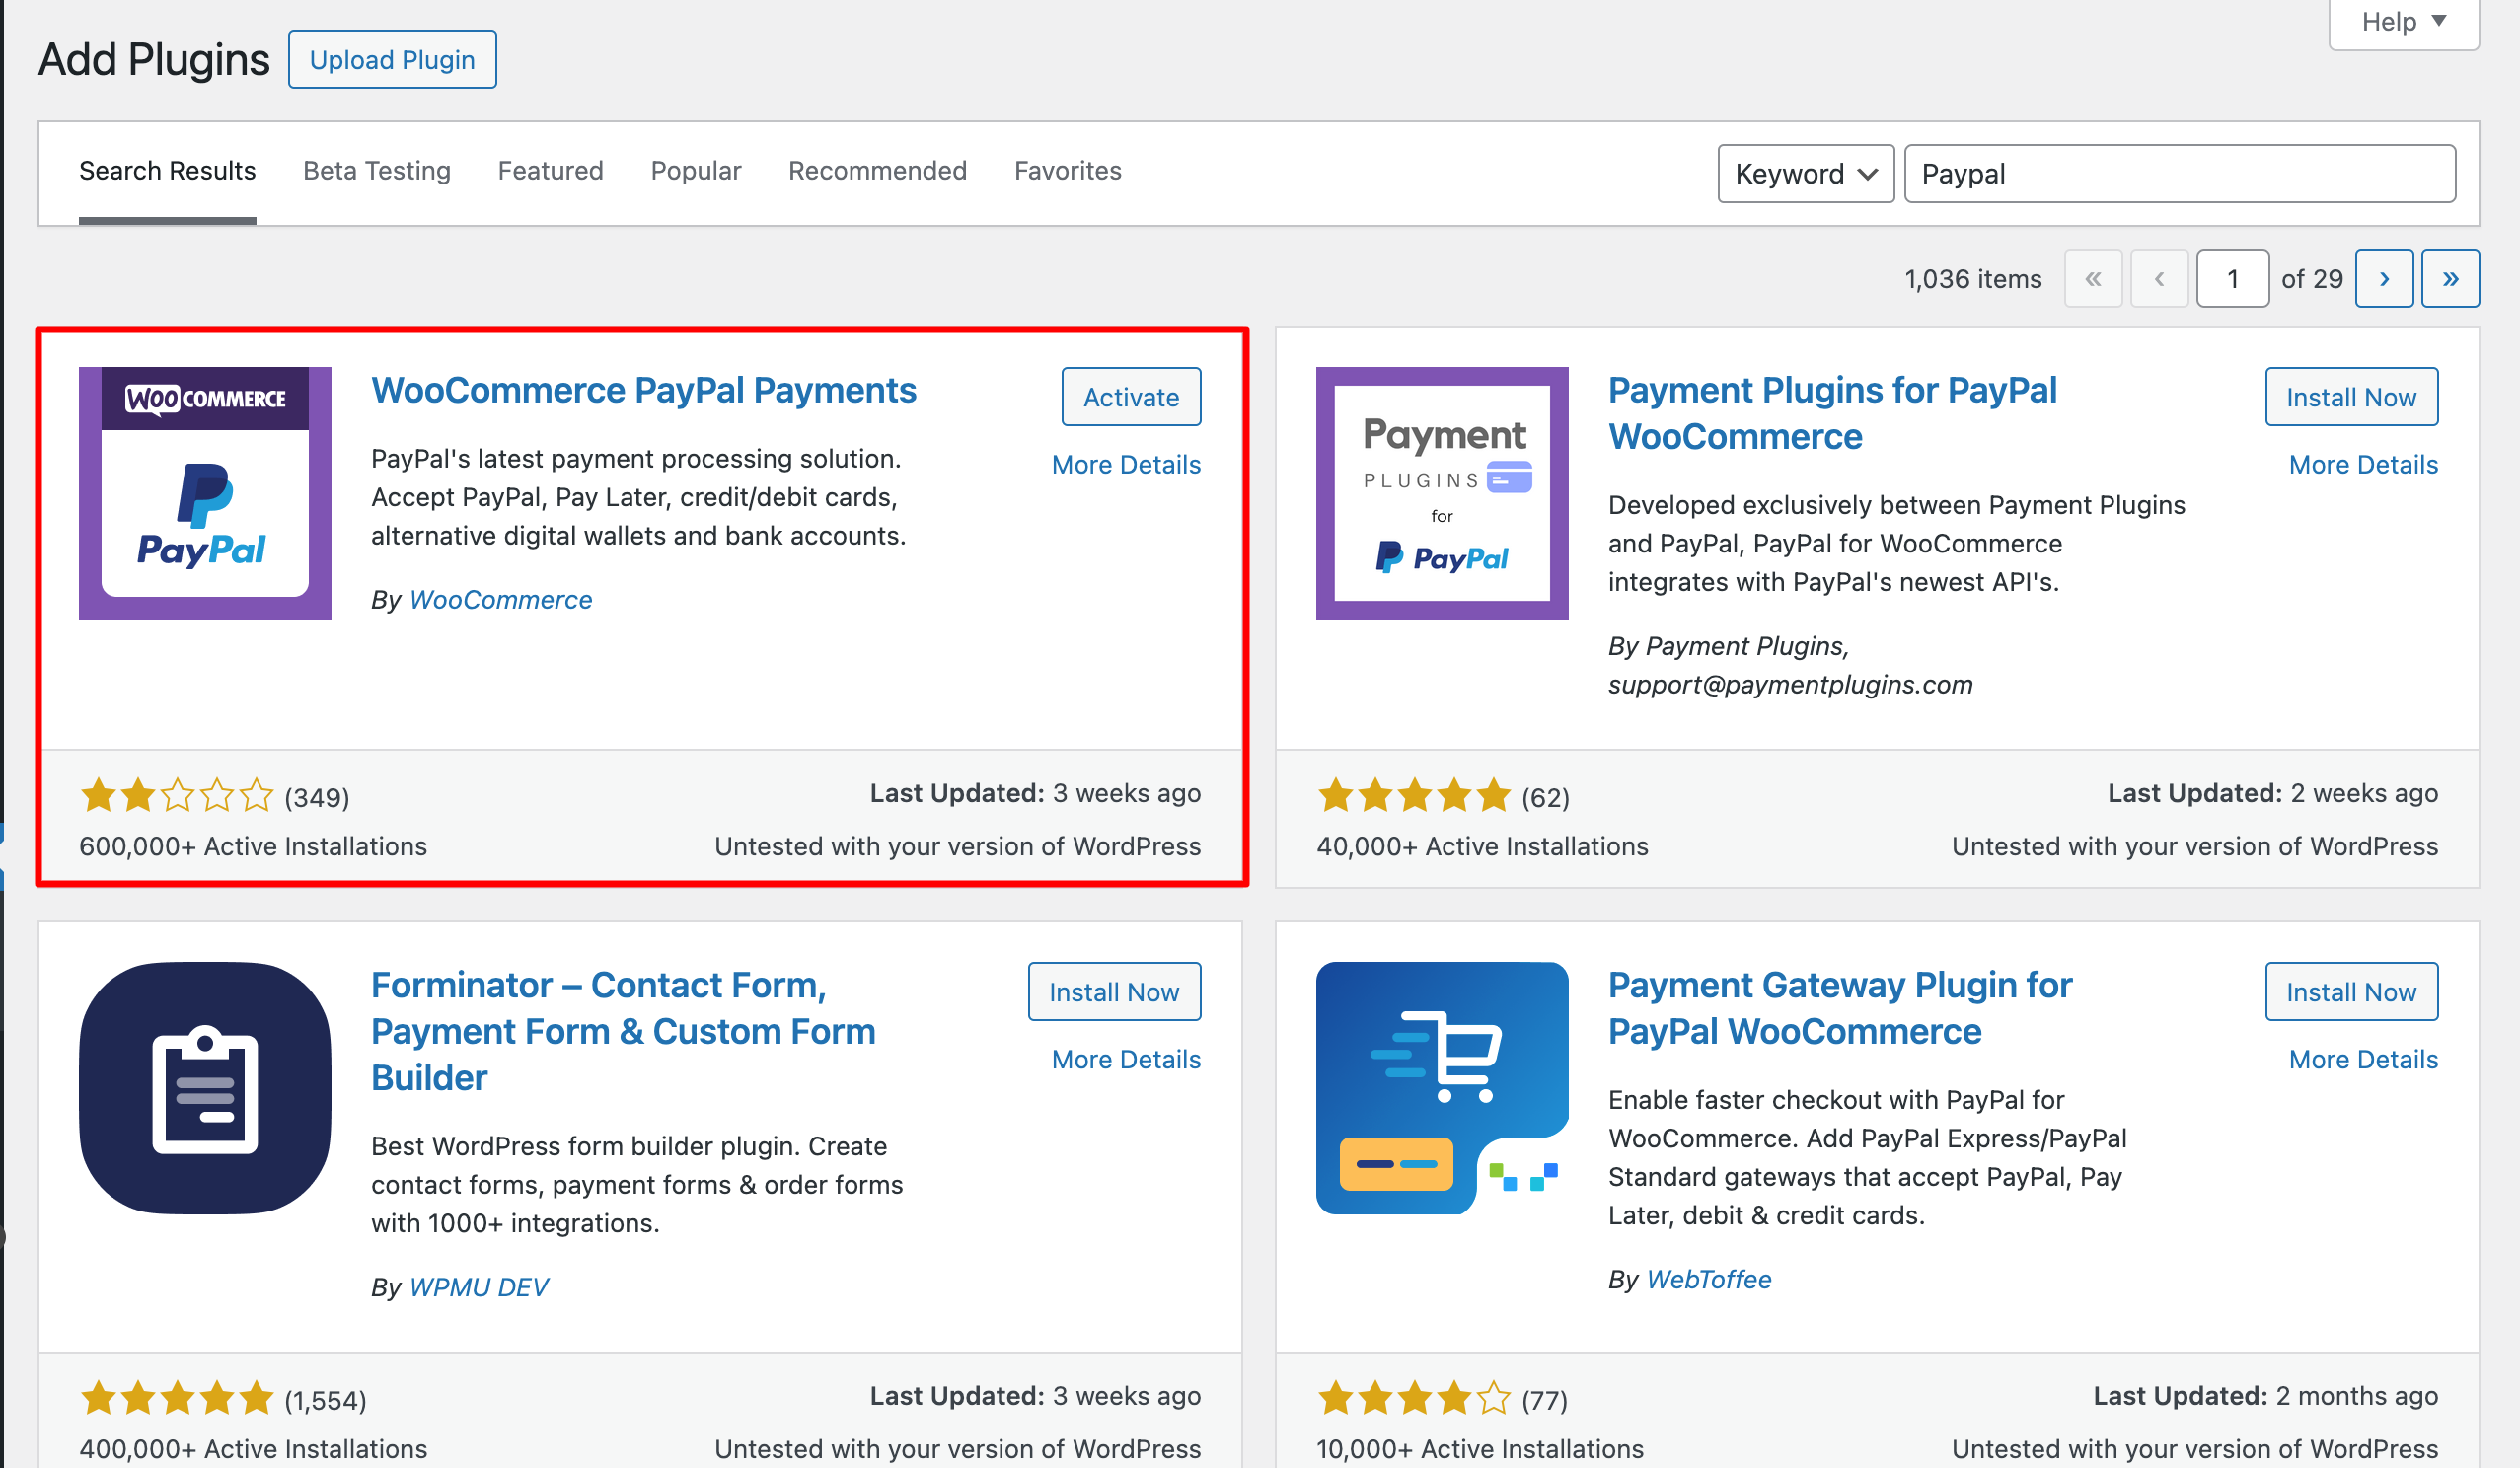 WooCommerce: Install PayPal Payment Plugin